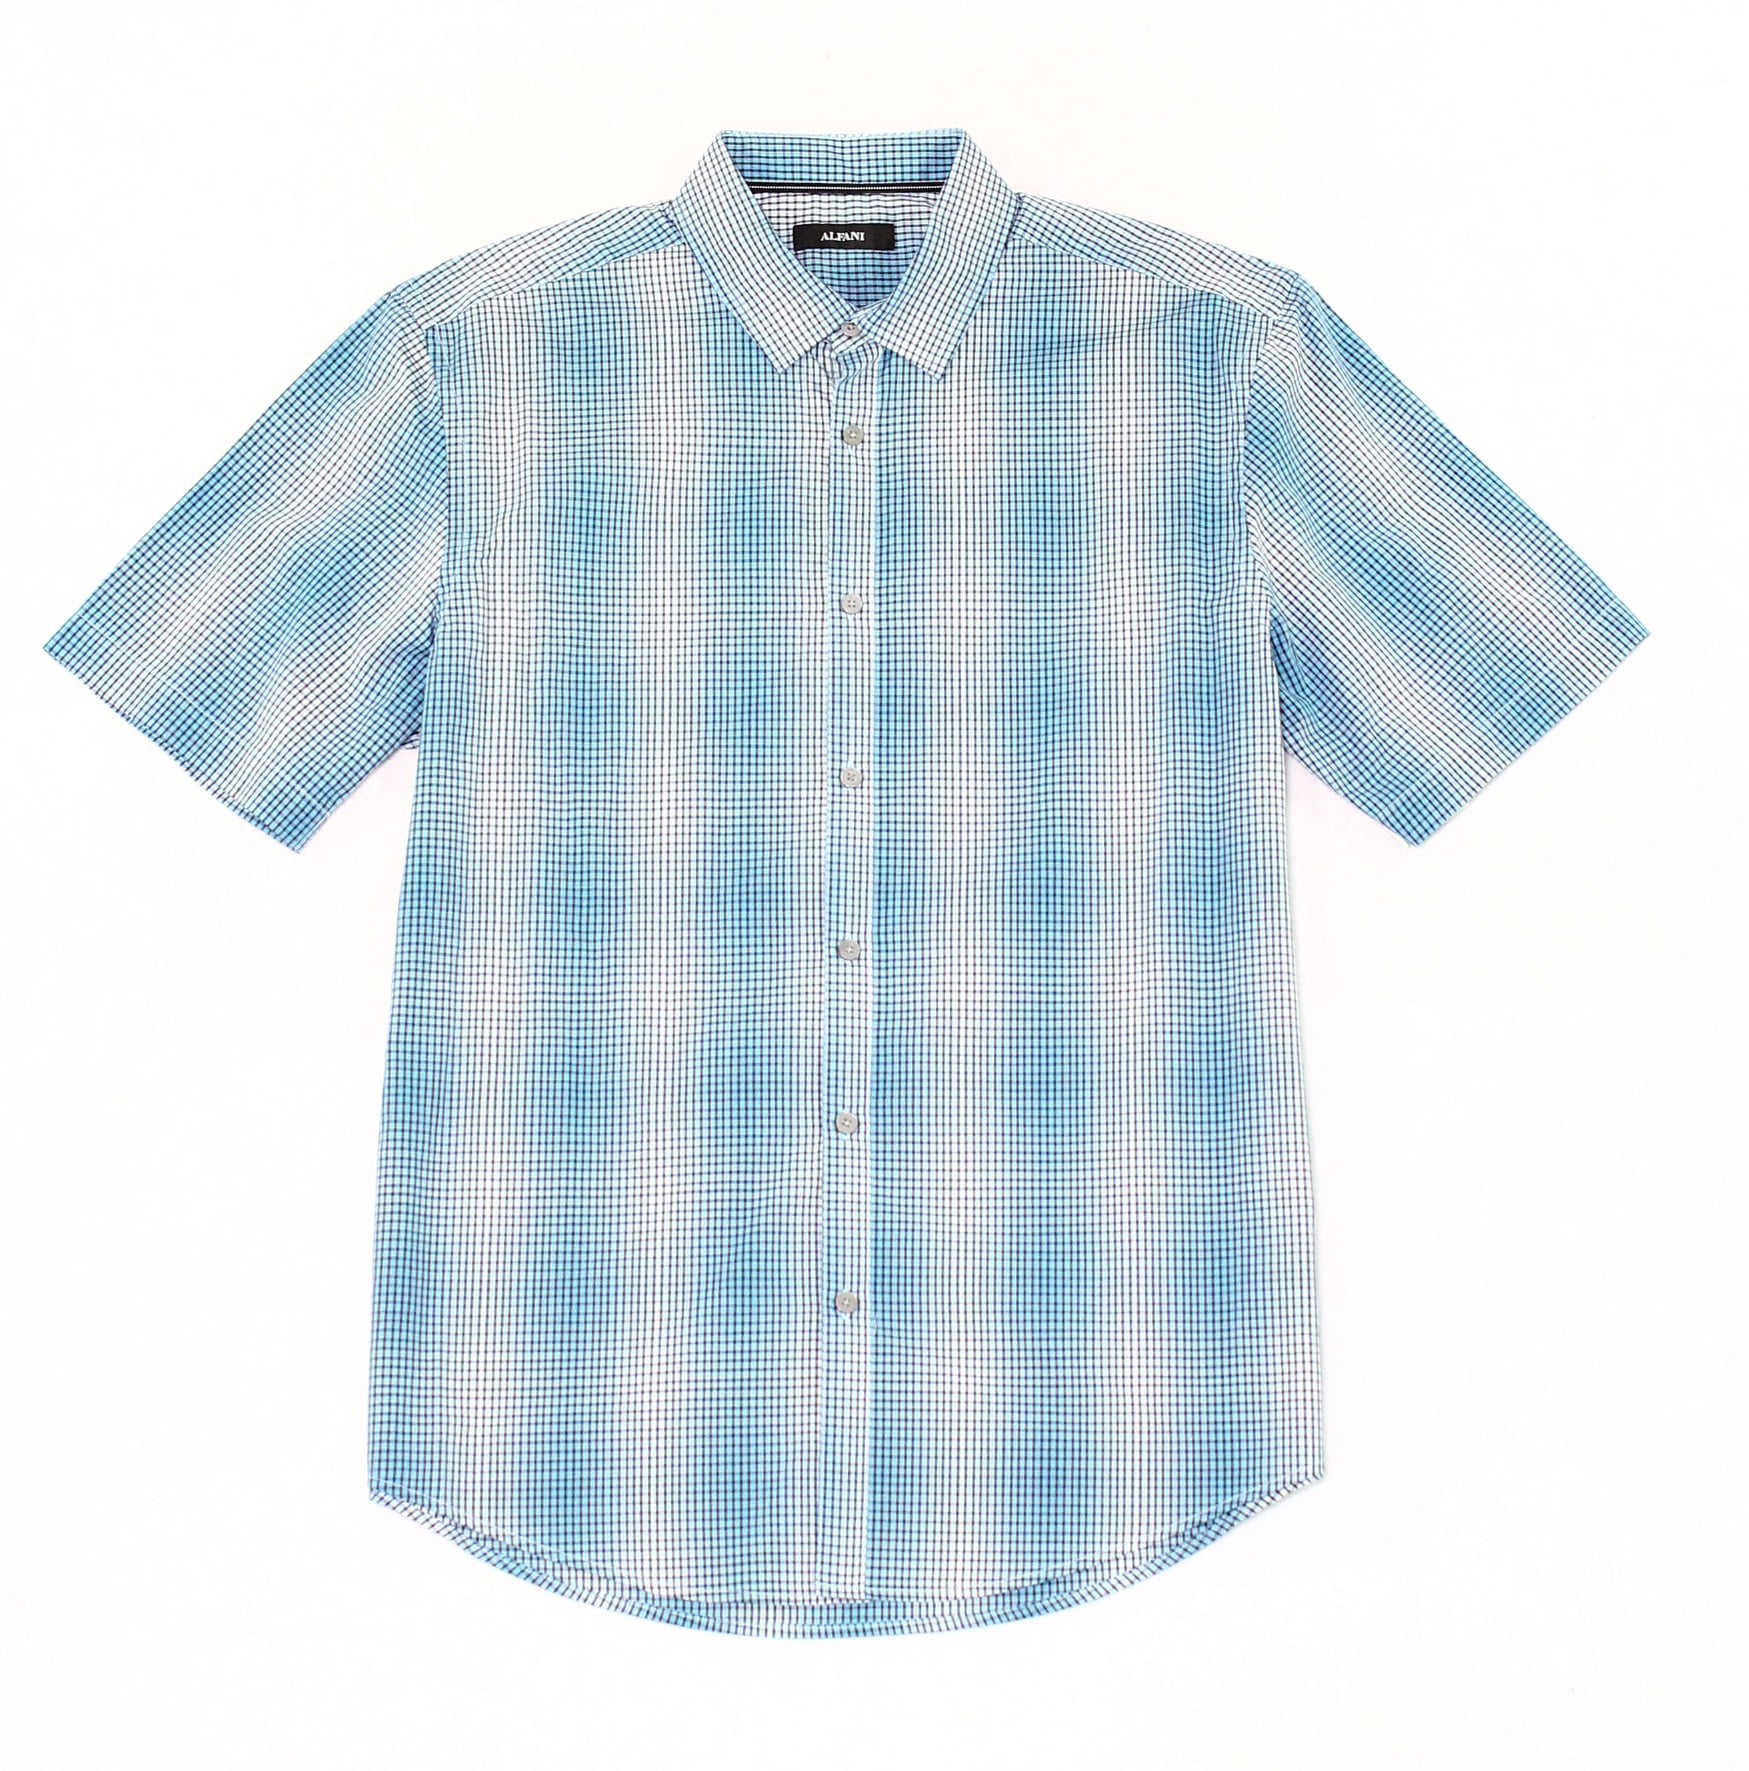 YUNY Men Formal Classic Fit Hollow Out Solid Color Casual Shirts Light Blue XL